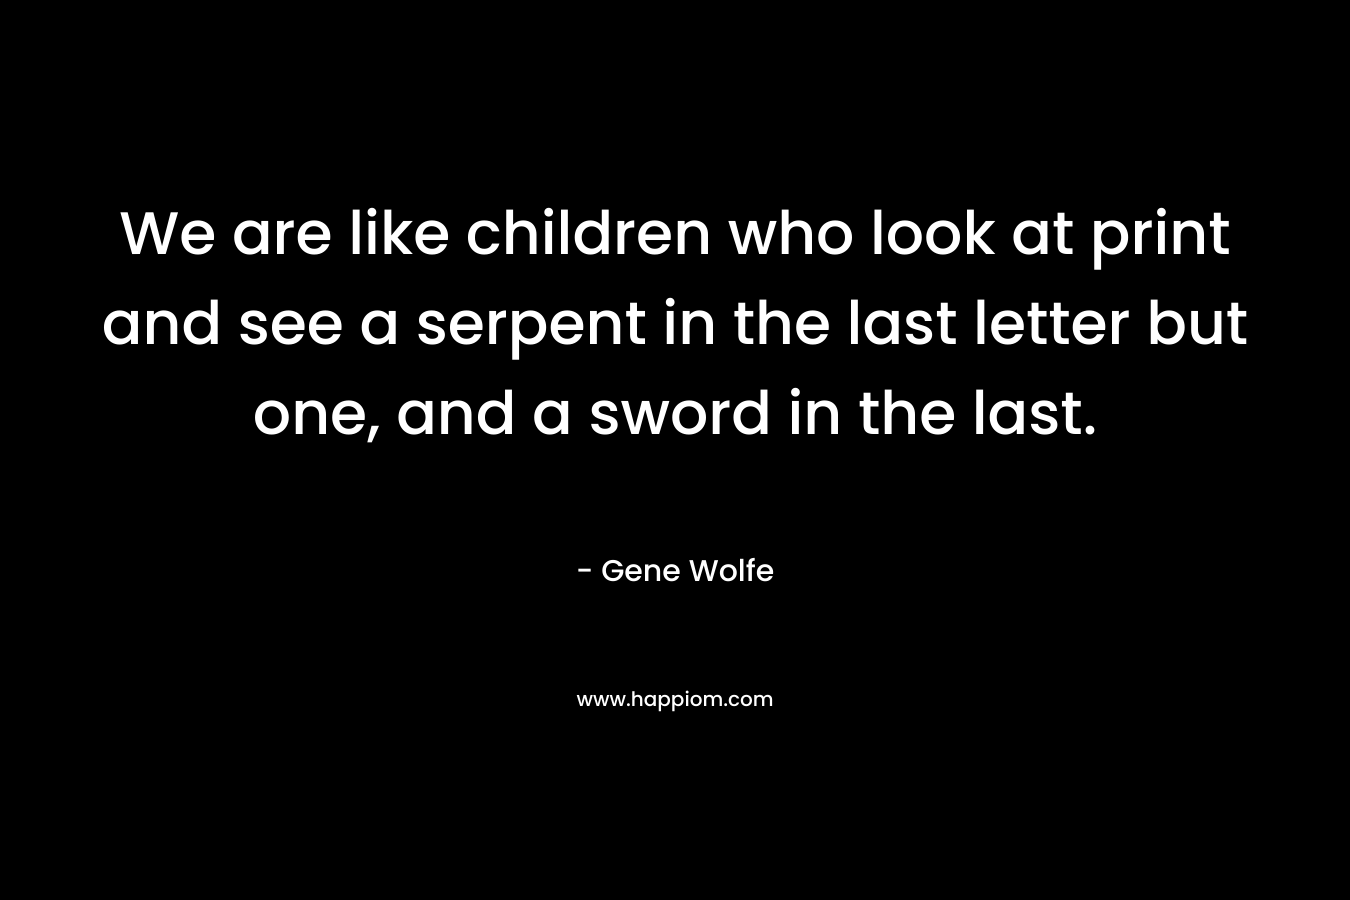 We are like children who look at print and see a serpent in the last letter but one, and a sword in the last. – Gene Wolfe